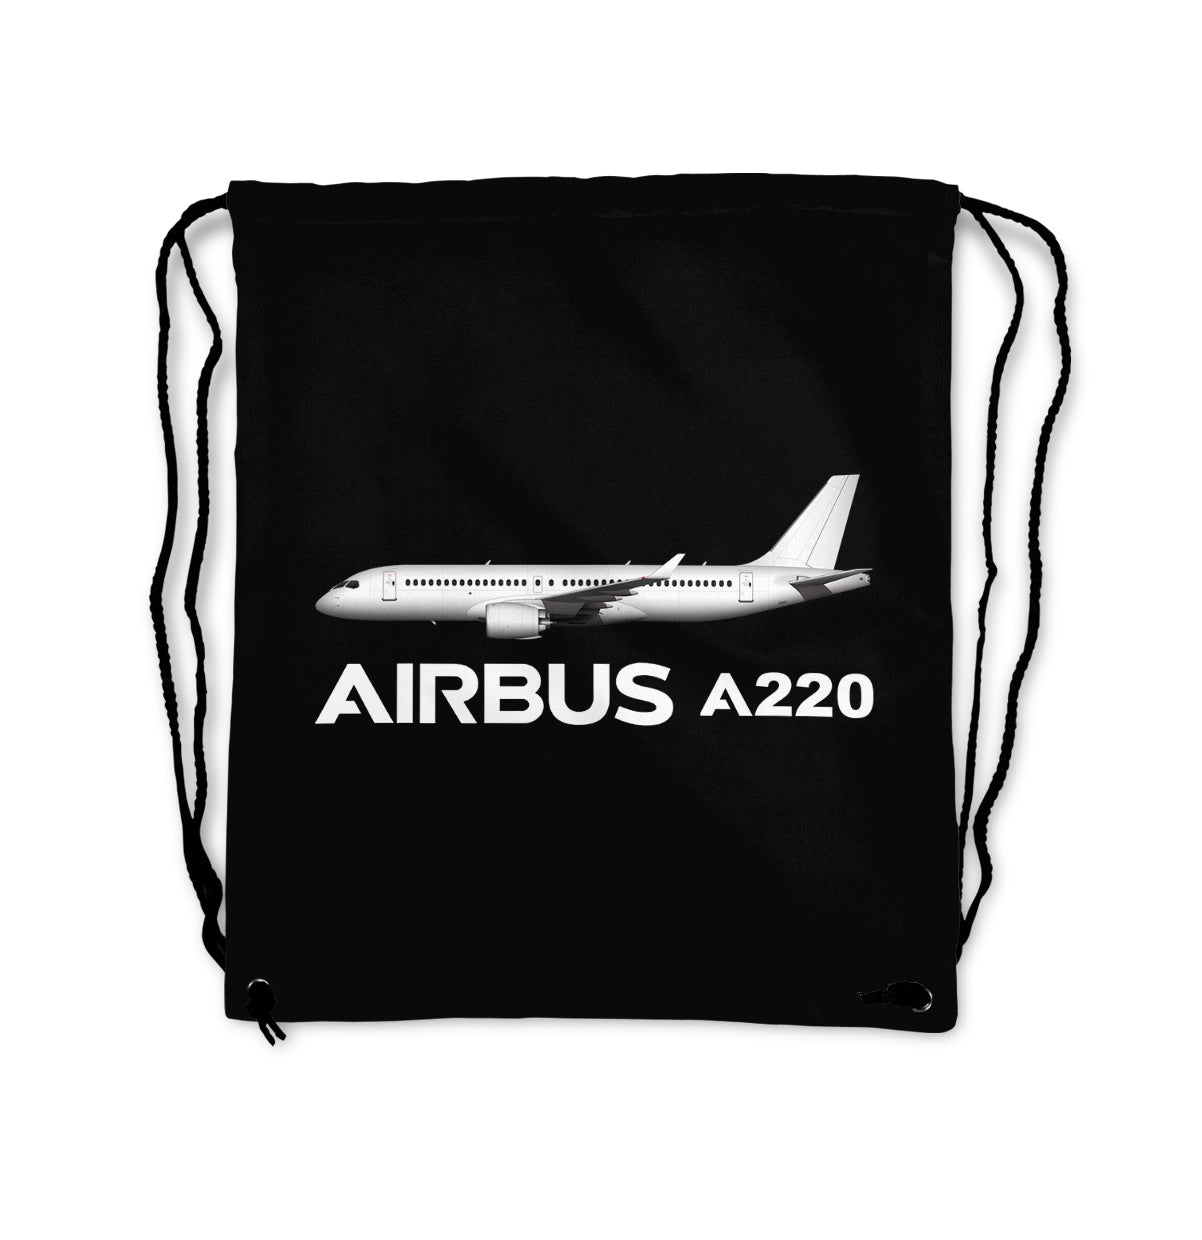 The Airbus A220 Designed Drawstring Bags